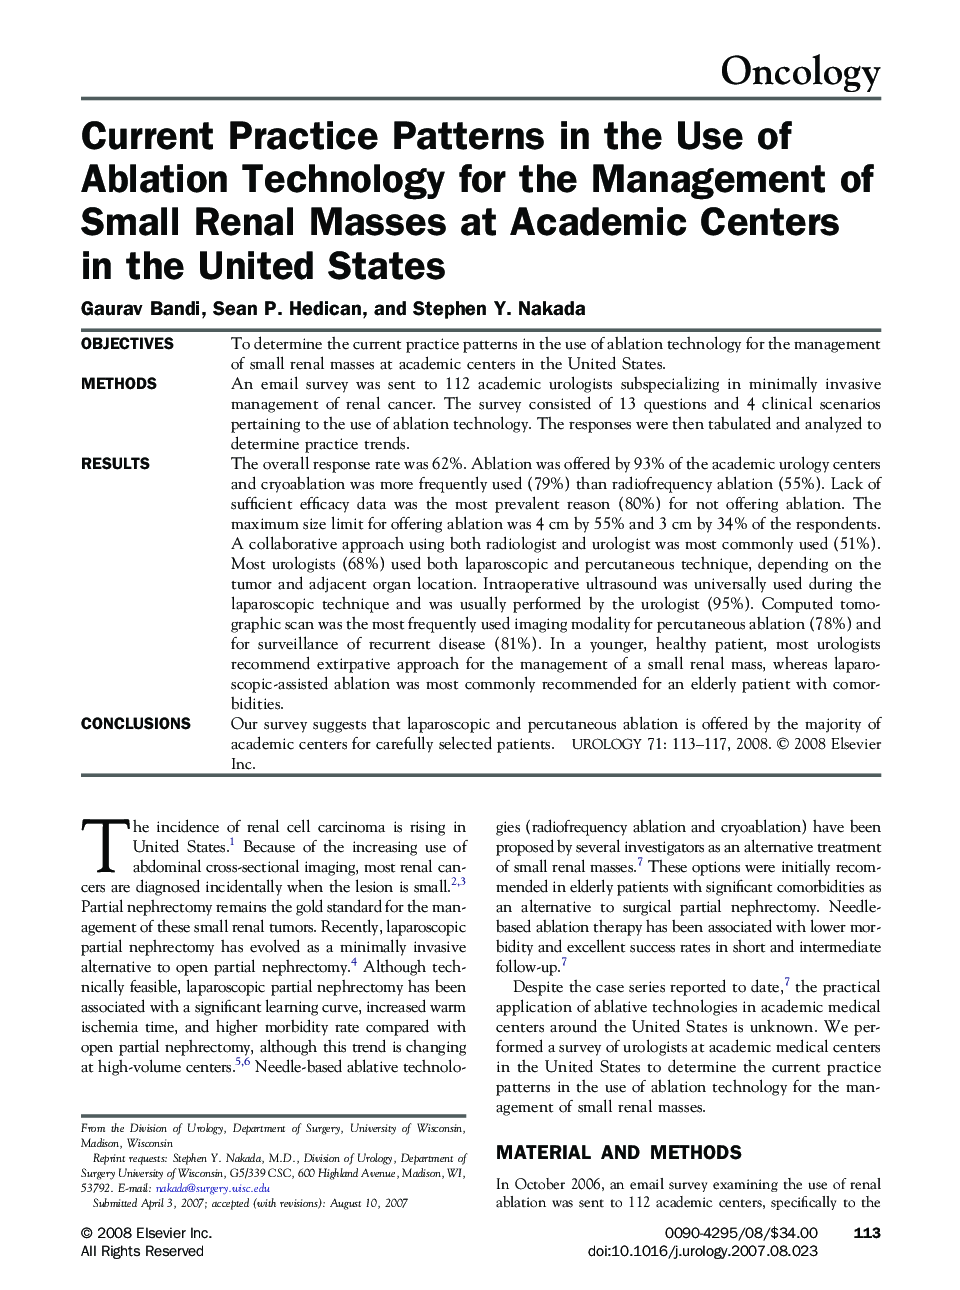 Current Practice Patterns in the Use of Ablation Technology for the Management of Small Renal Masses at Academic Centers in the United States